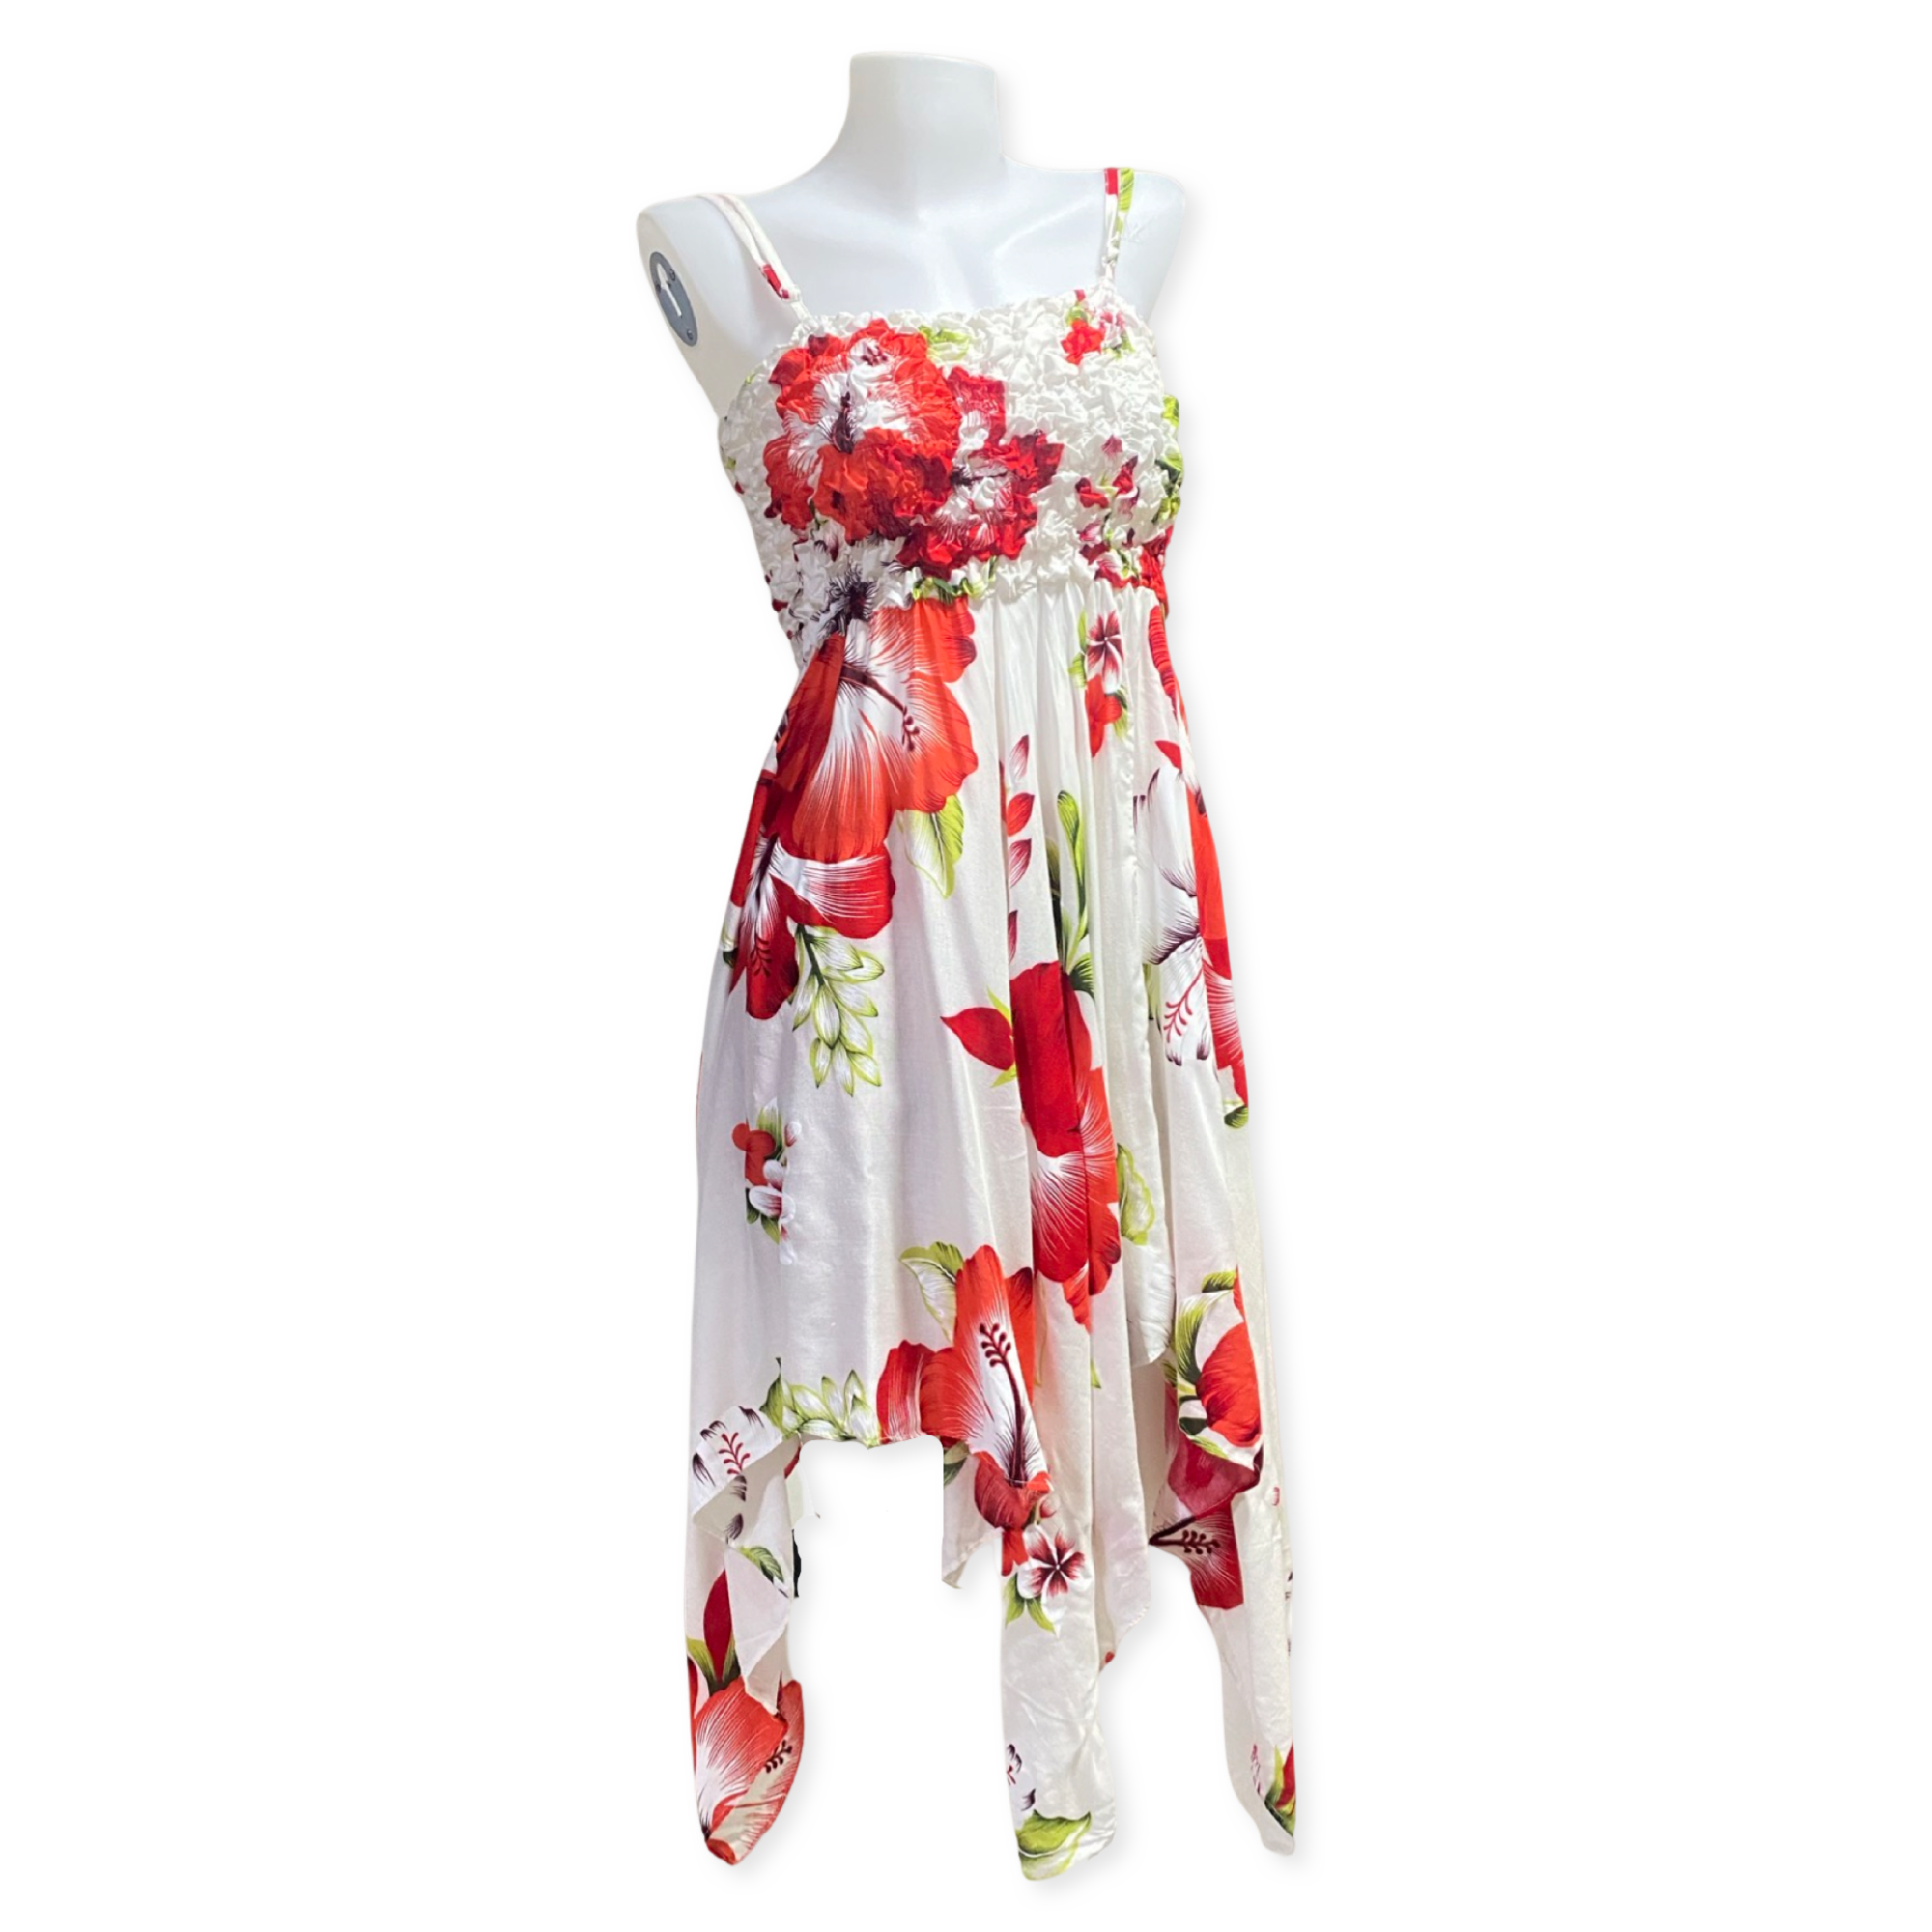 Women’s Hibiscus White/Red Floral Uneven Fairy Dress, Full Elastic Top With Halter Neck, Soft and Flowy.